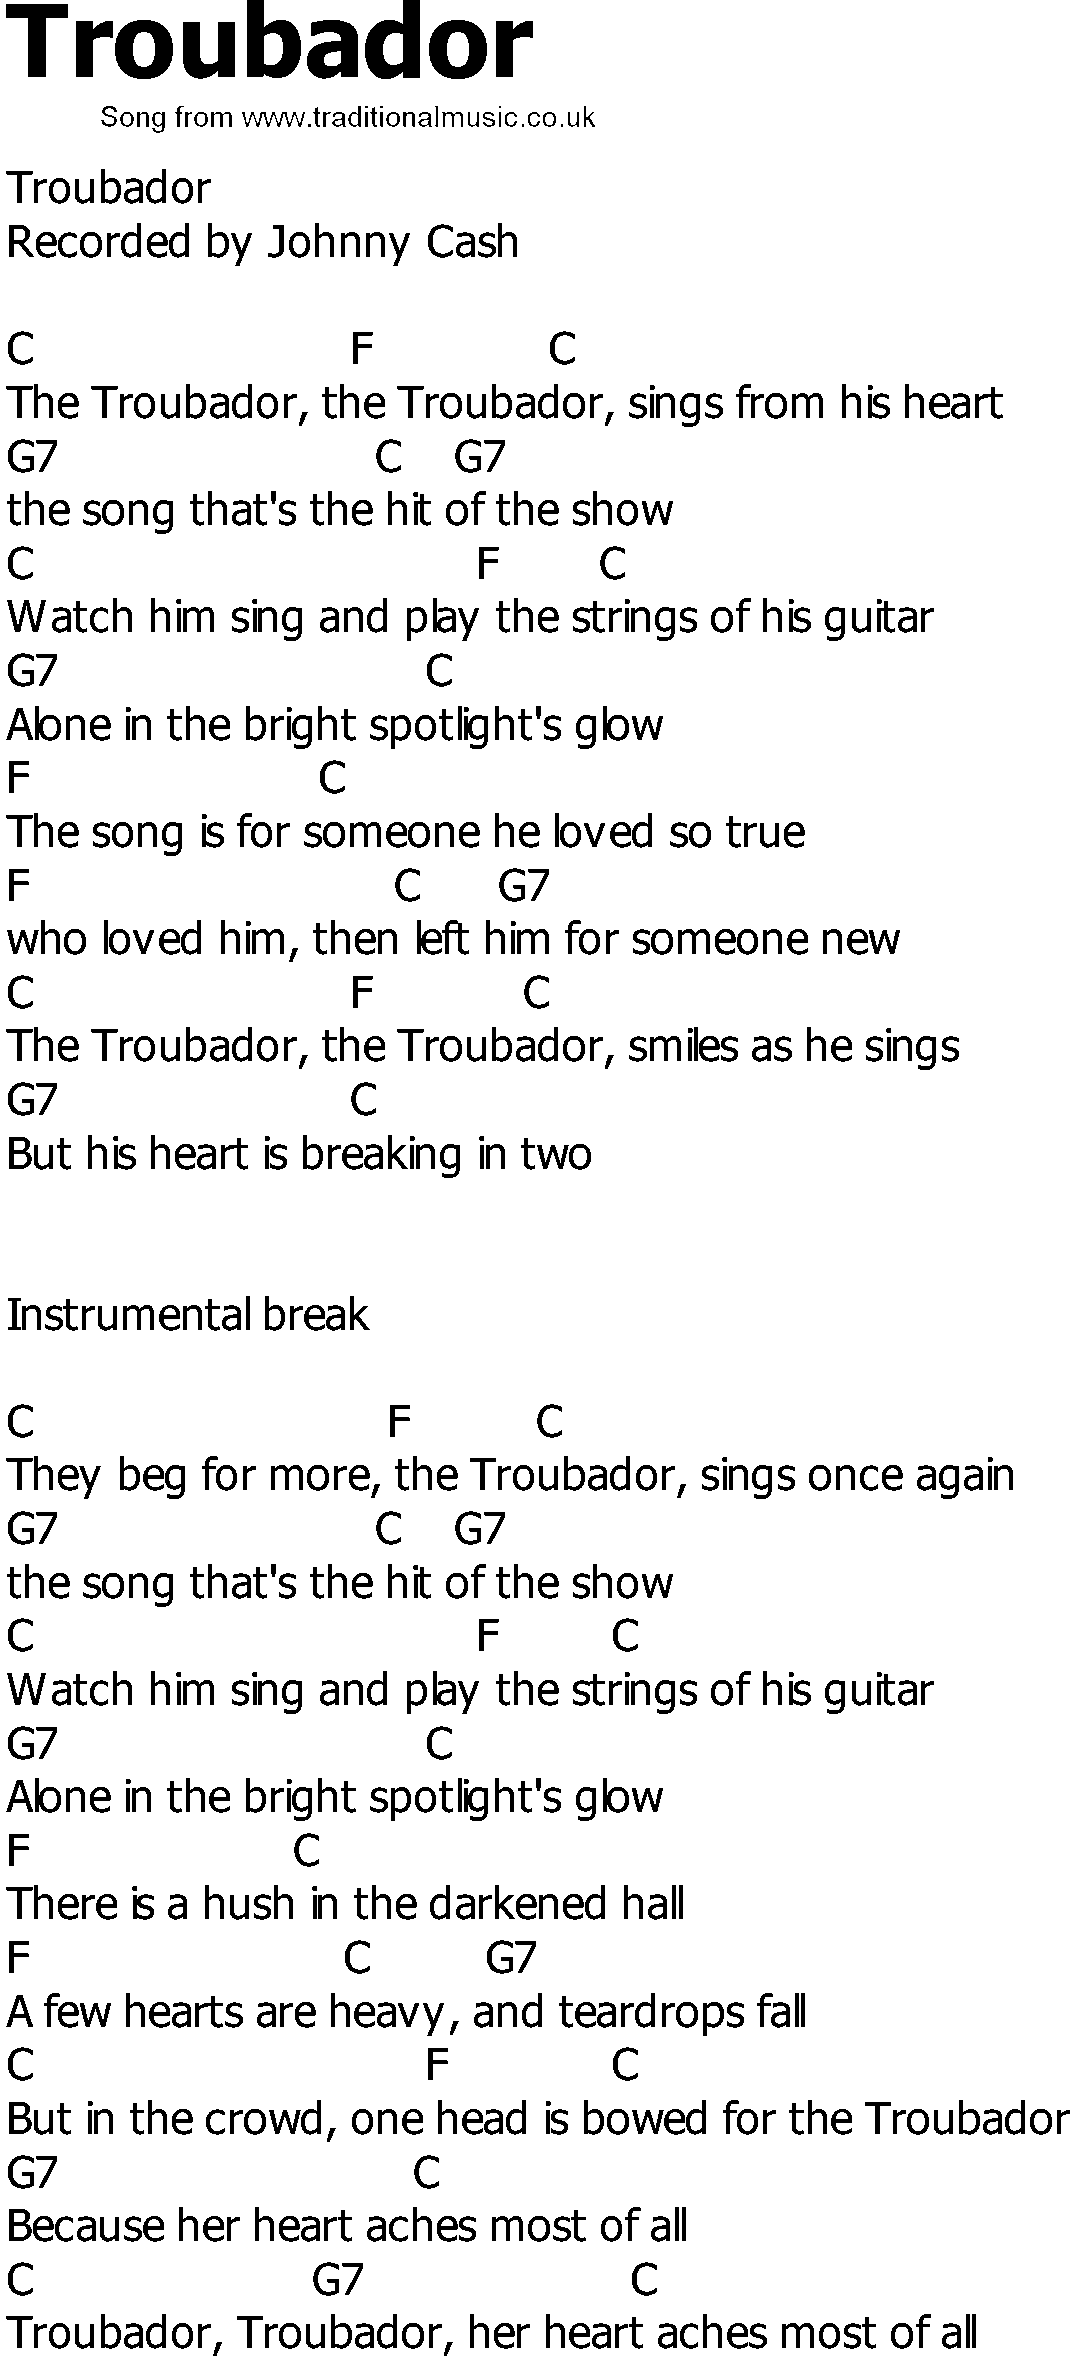 Old Country song lyrics with chords - Troubador